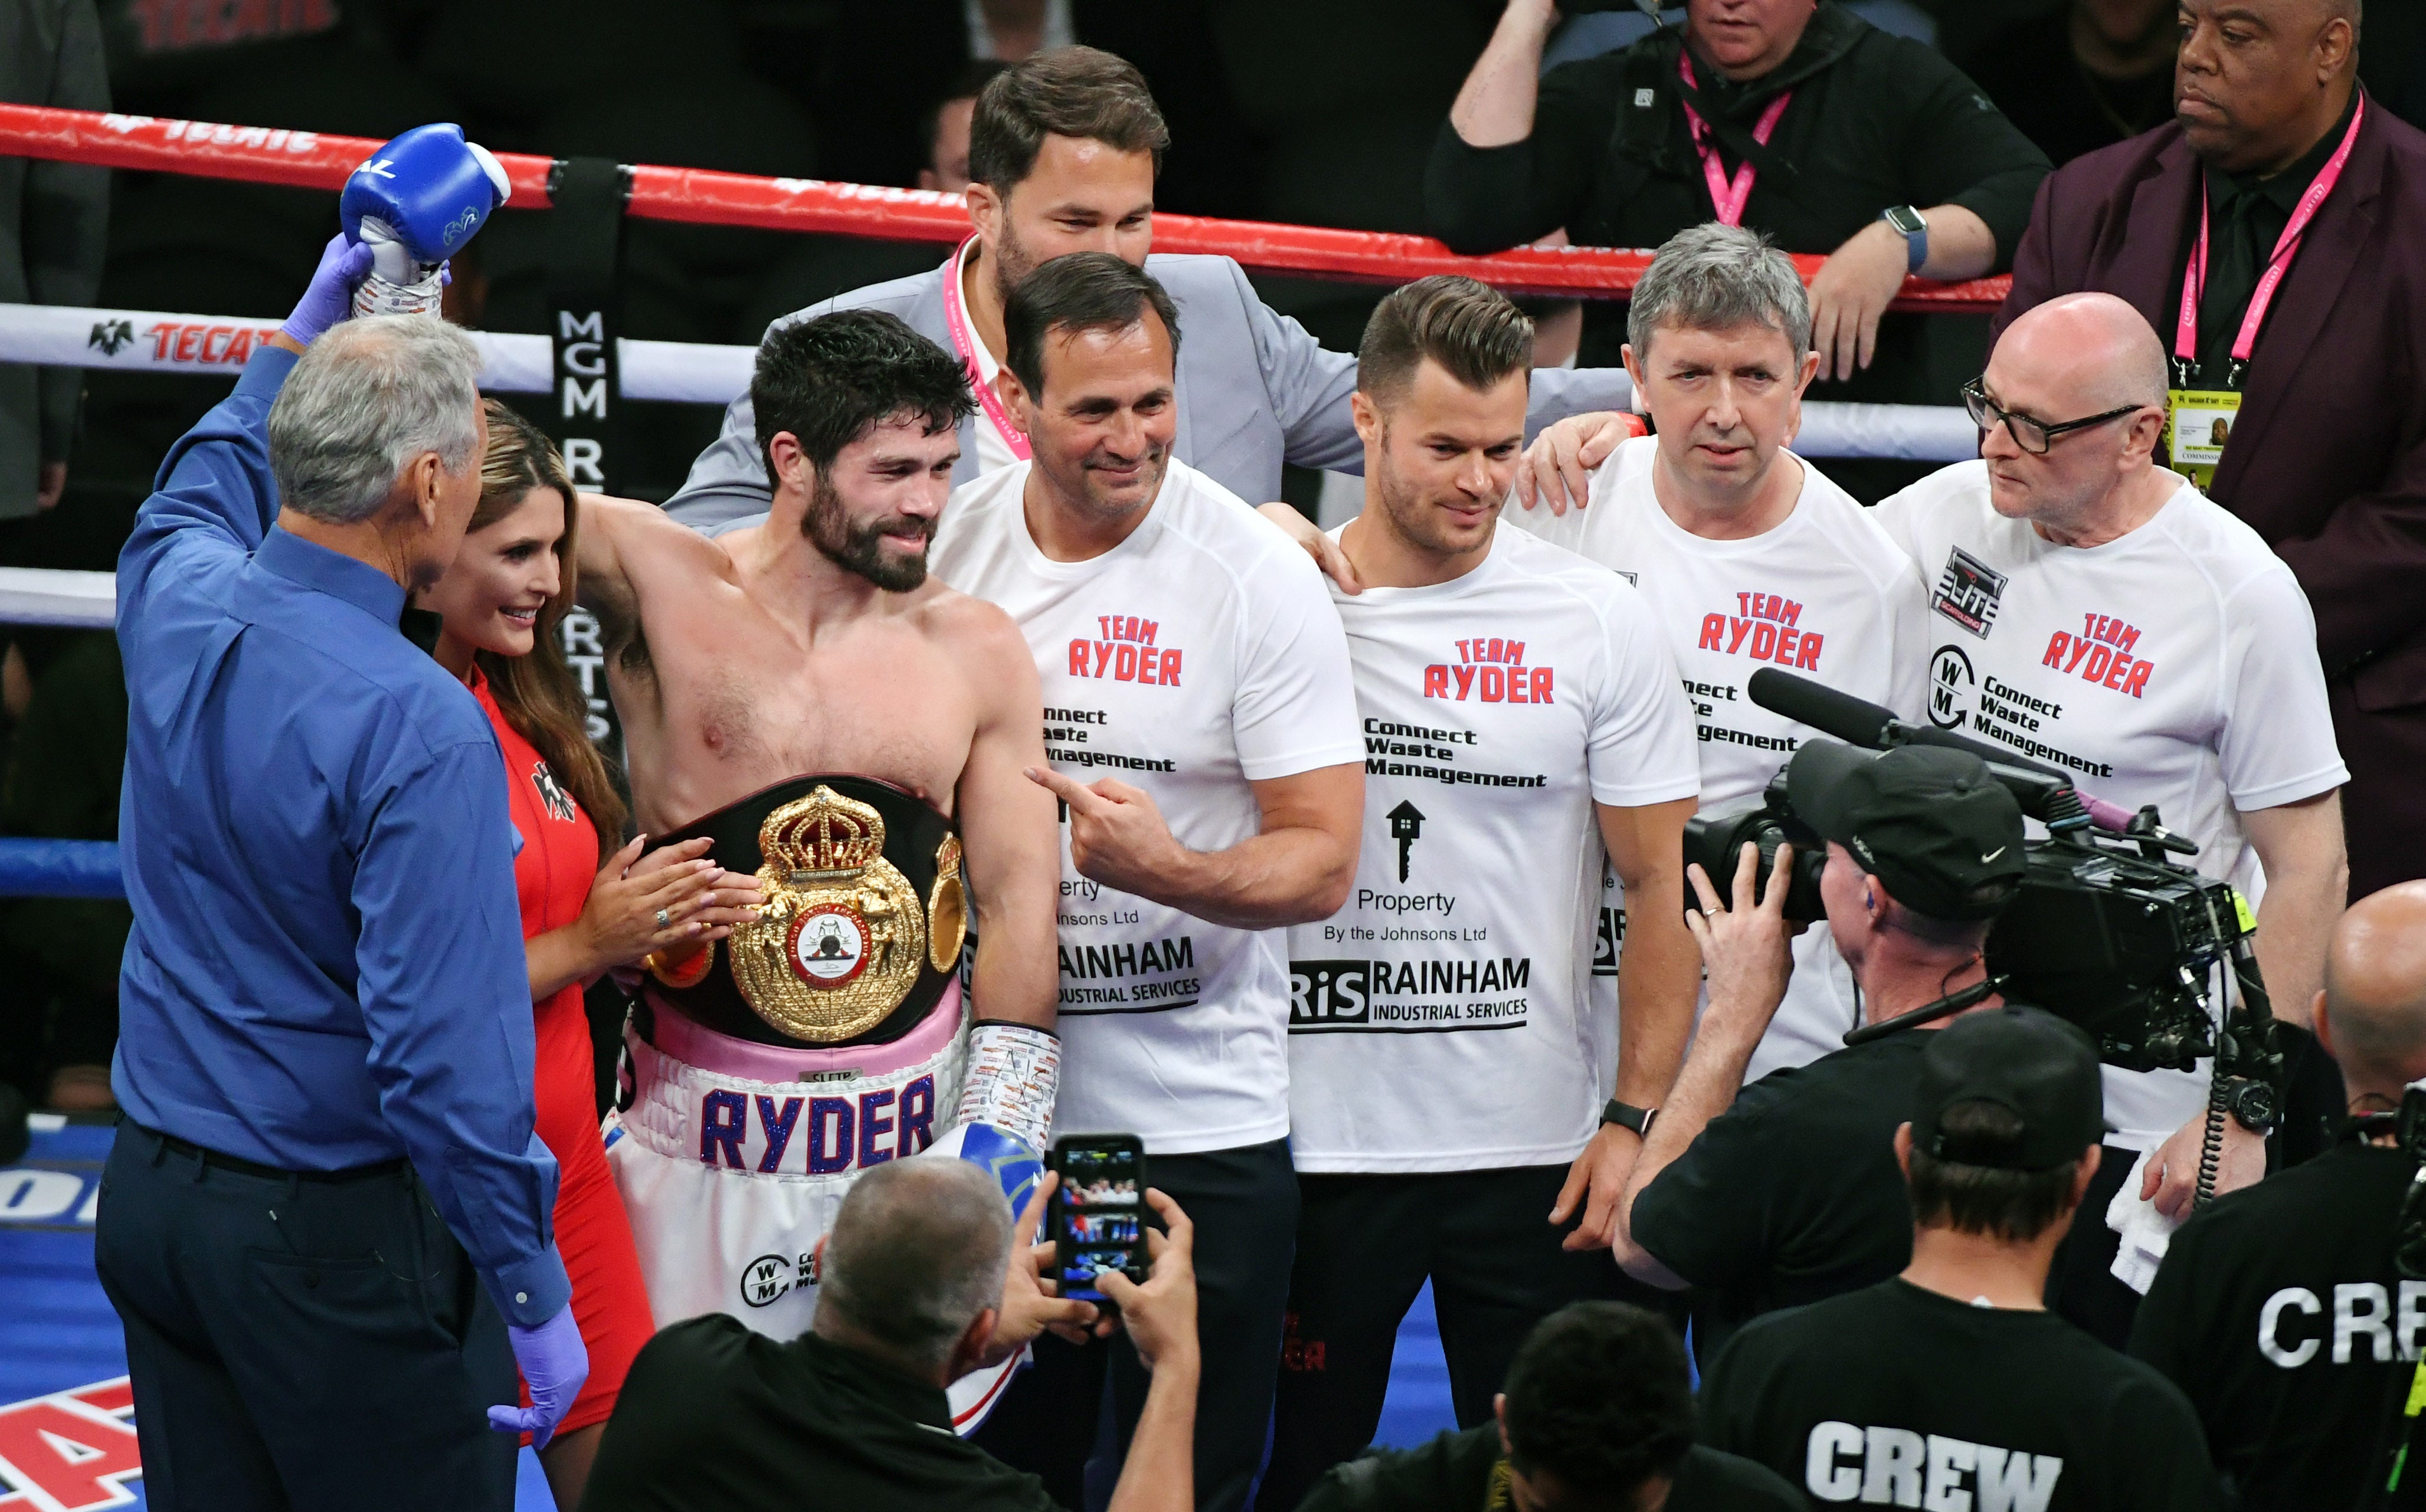 Lawrence with Ryder after the boxer’s interim-title win in 2019